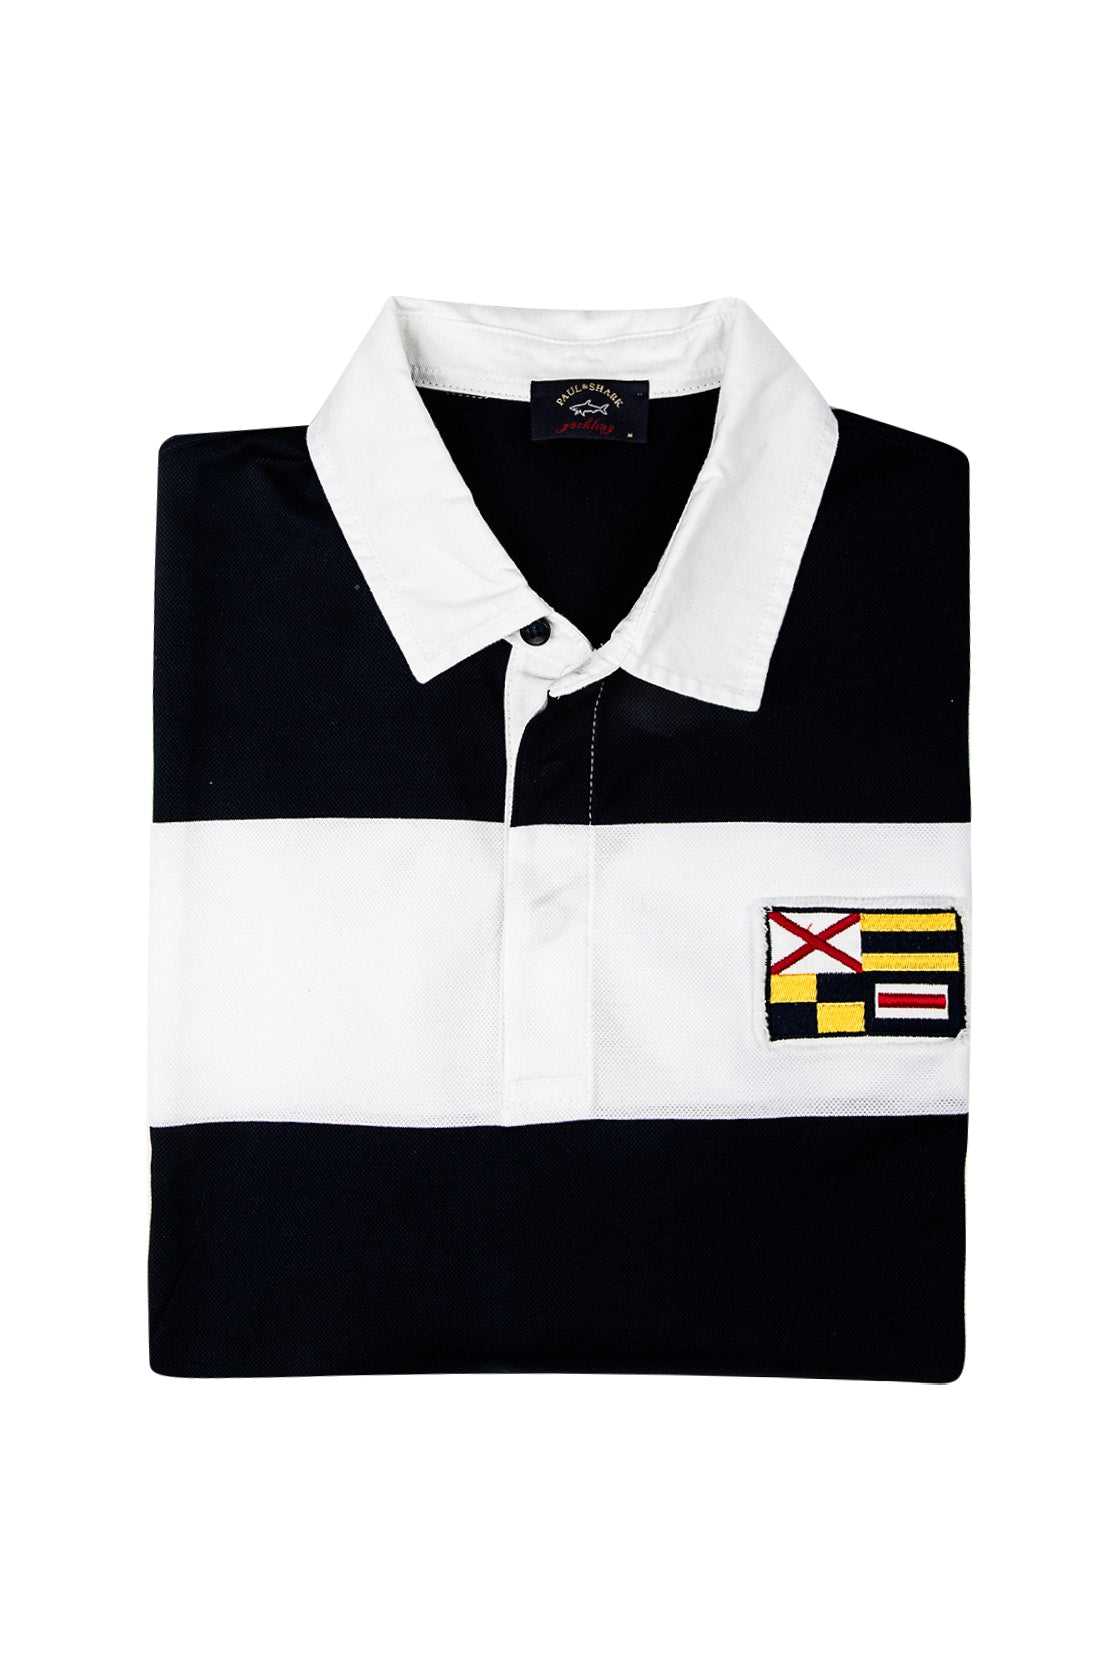 Paul & Shark Striped Rugby Top